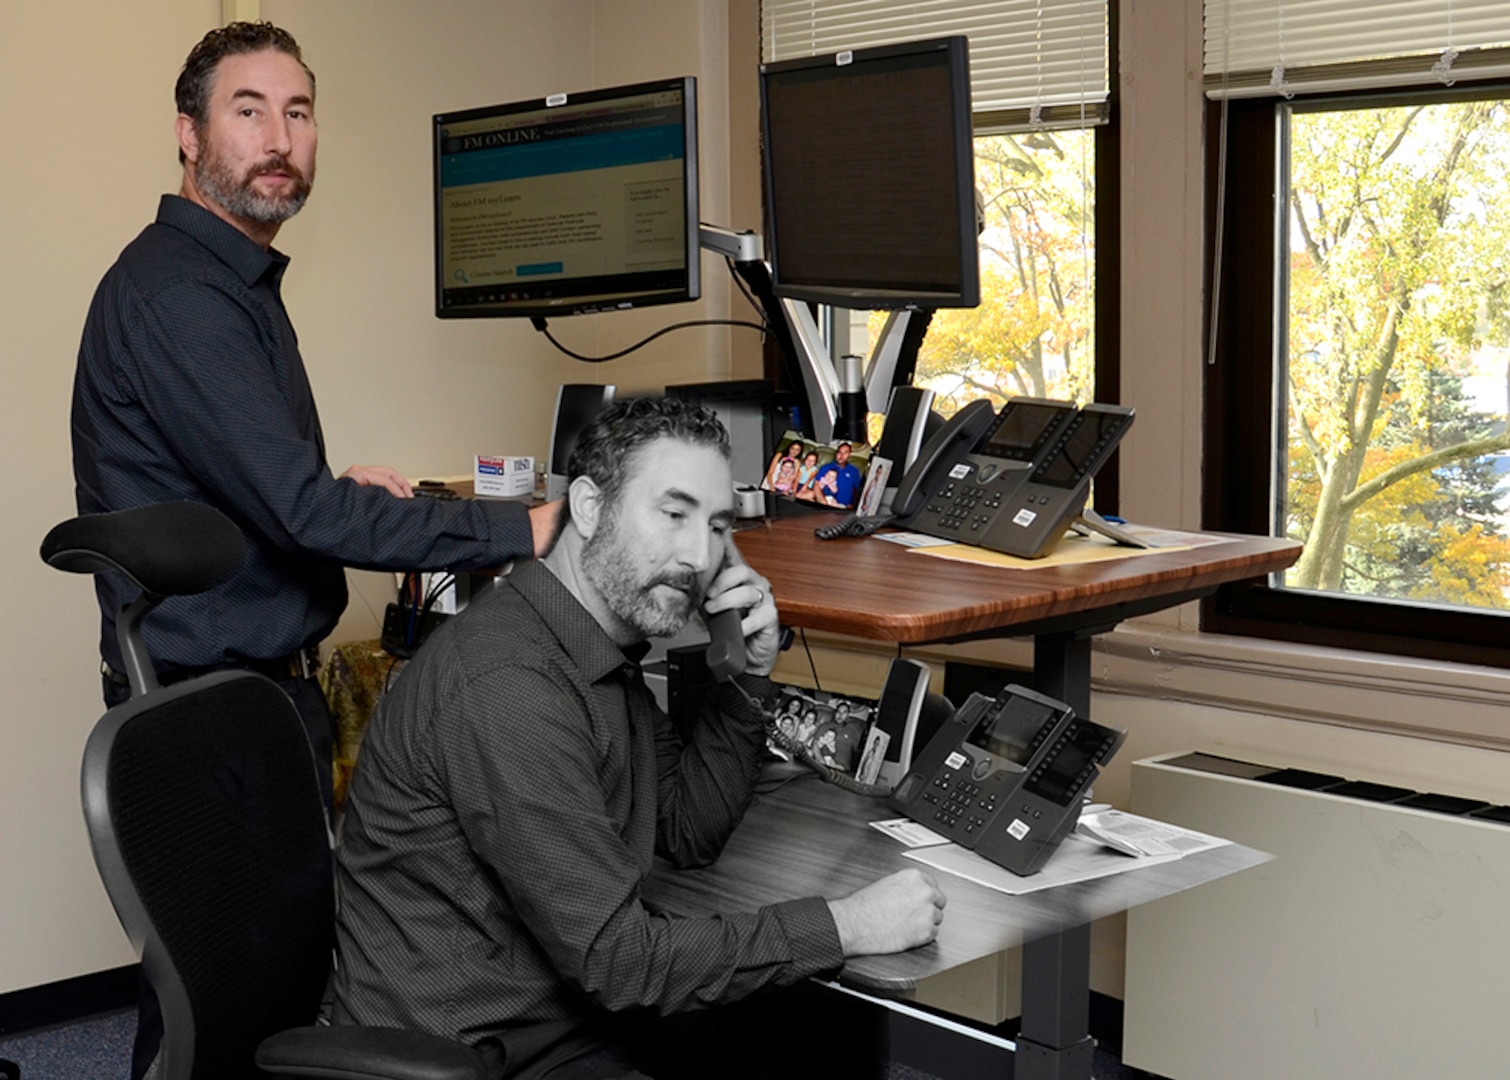 DLA Disposition Services Finance Director Isaac Stanley received his first sit-stand desk in June and said the work space flexibility has improved his posture and lessened back pain. Photo illustration.